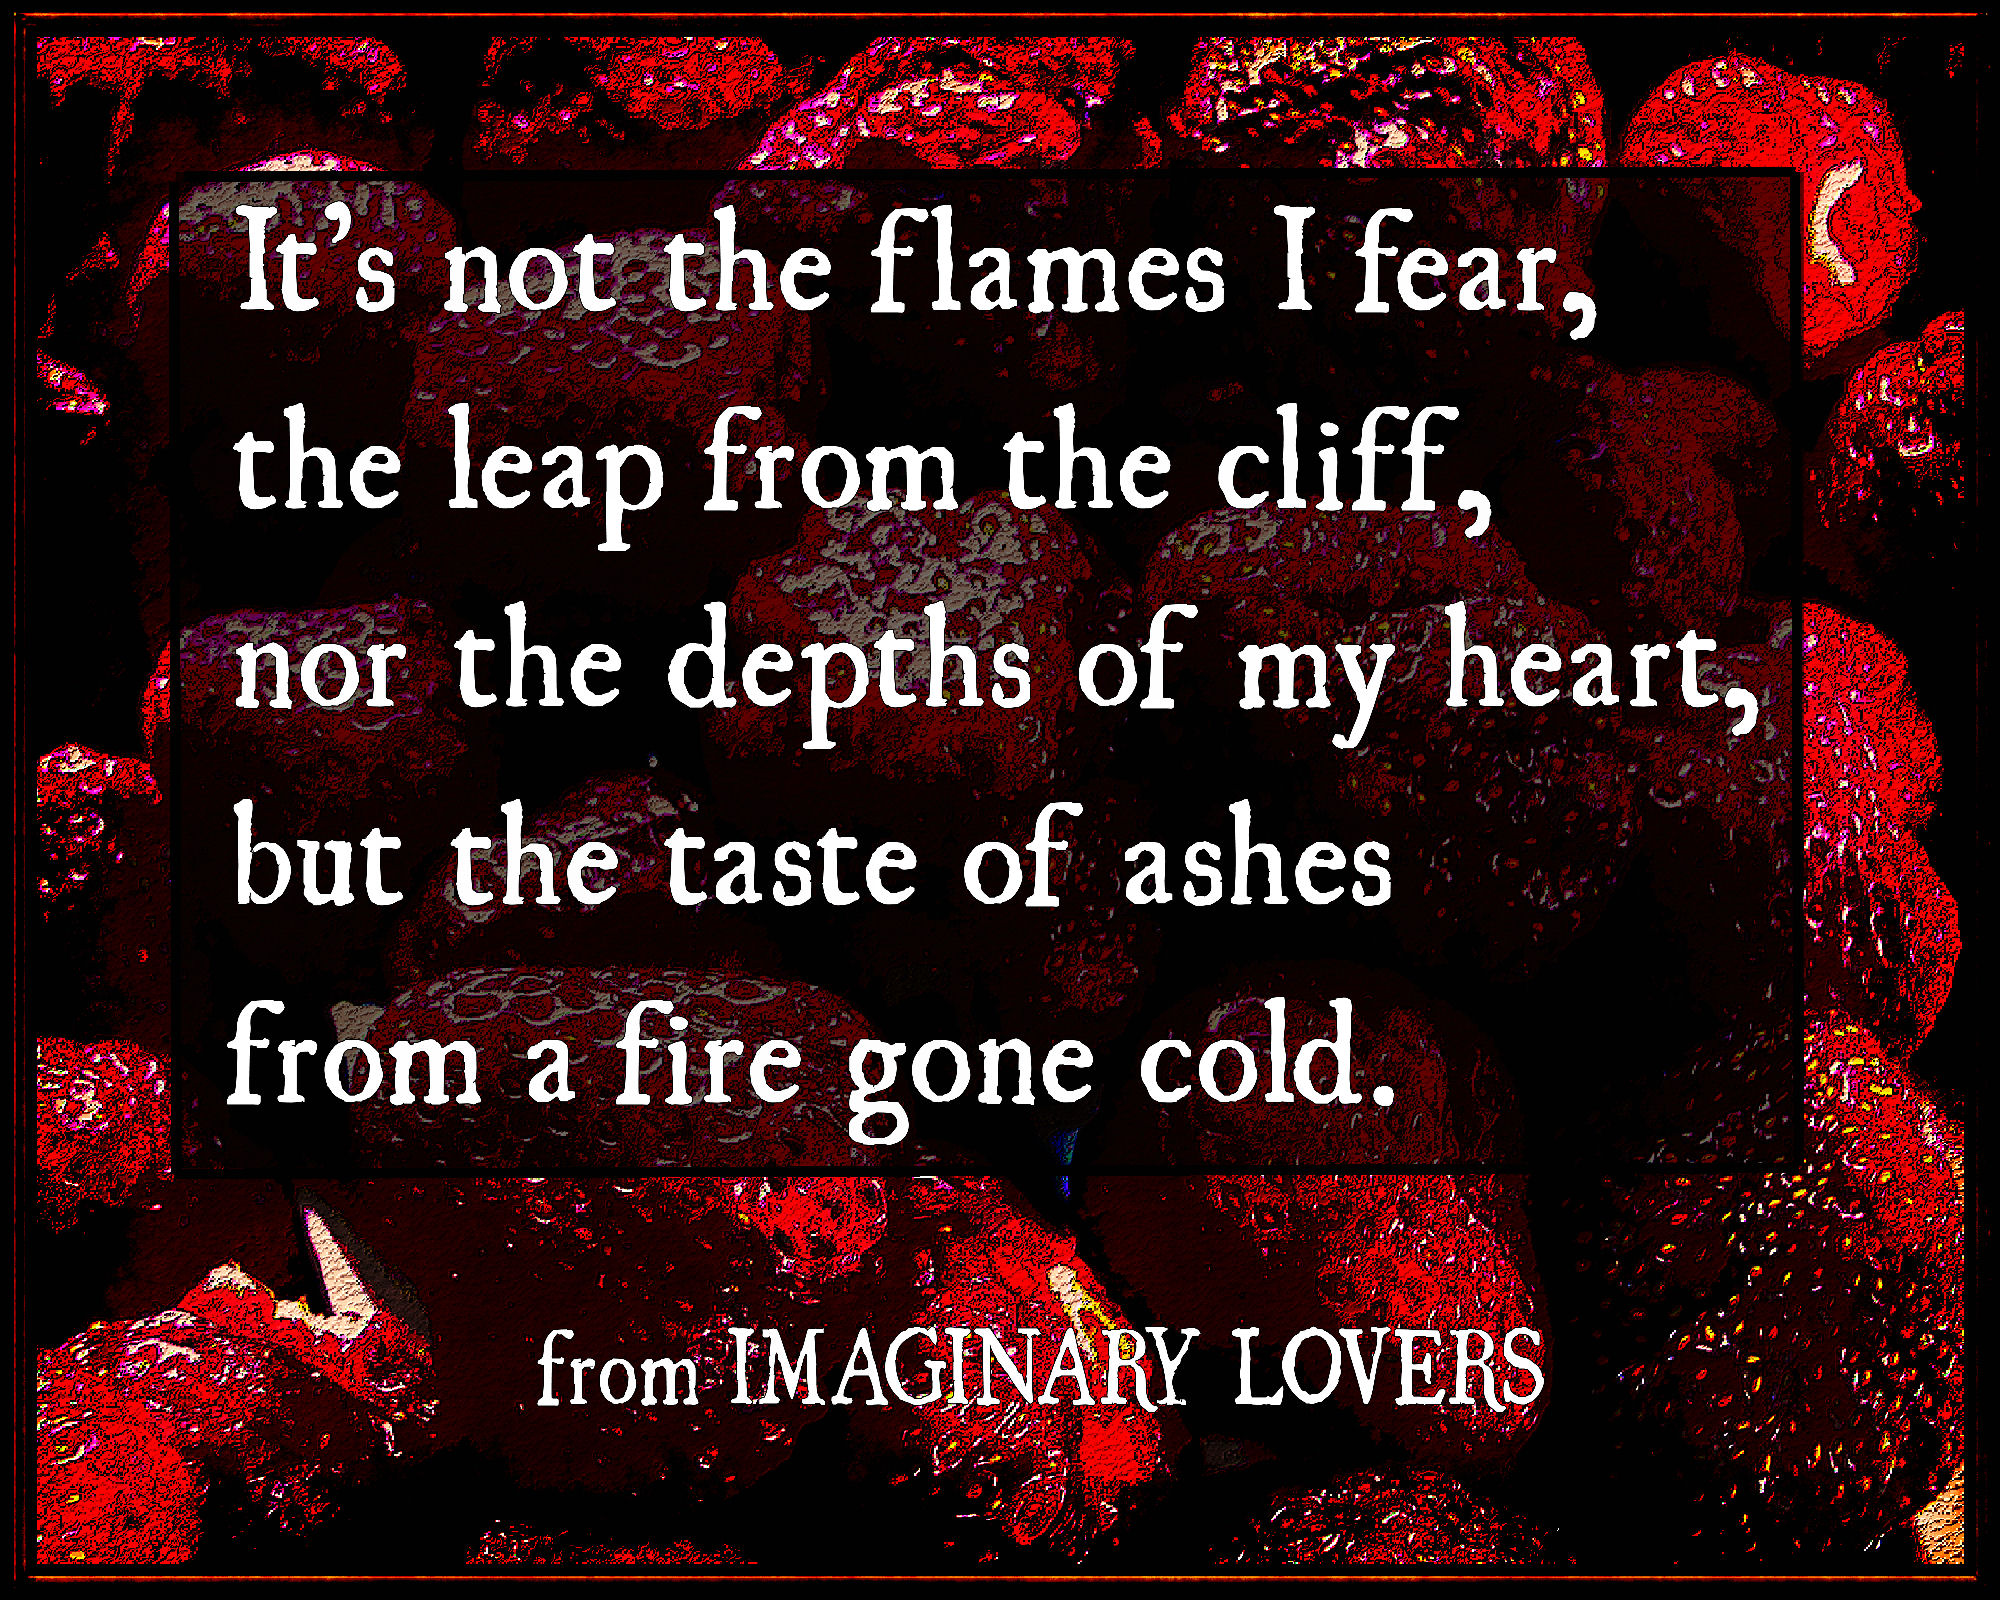 sample from Kate Taylor's poetry book IMAGINARY LOVERS, It's not the flames I fear, the leap from the cliff, nor the depths of my heart, but the taste of ashes from a fire gone cold.